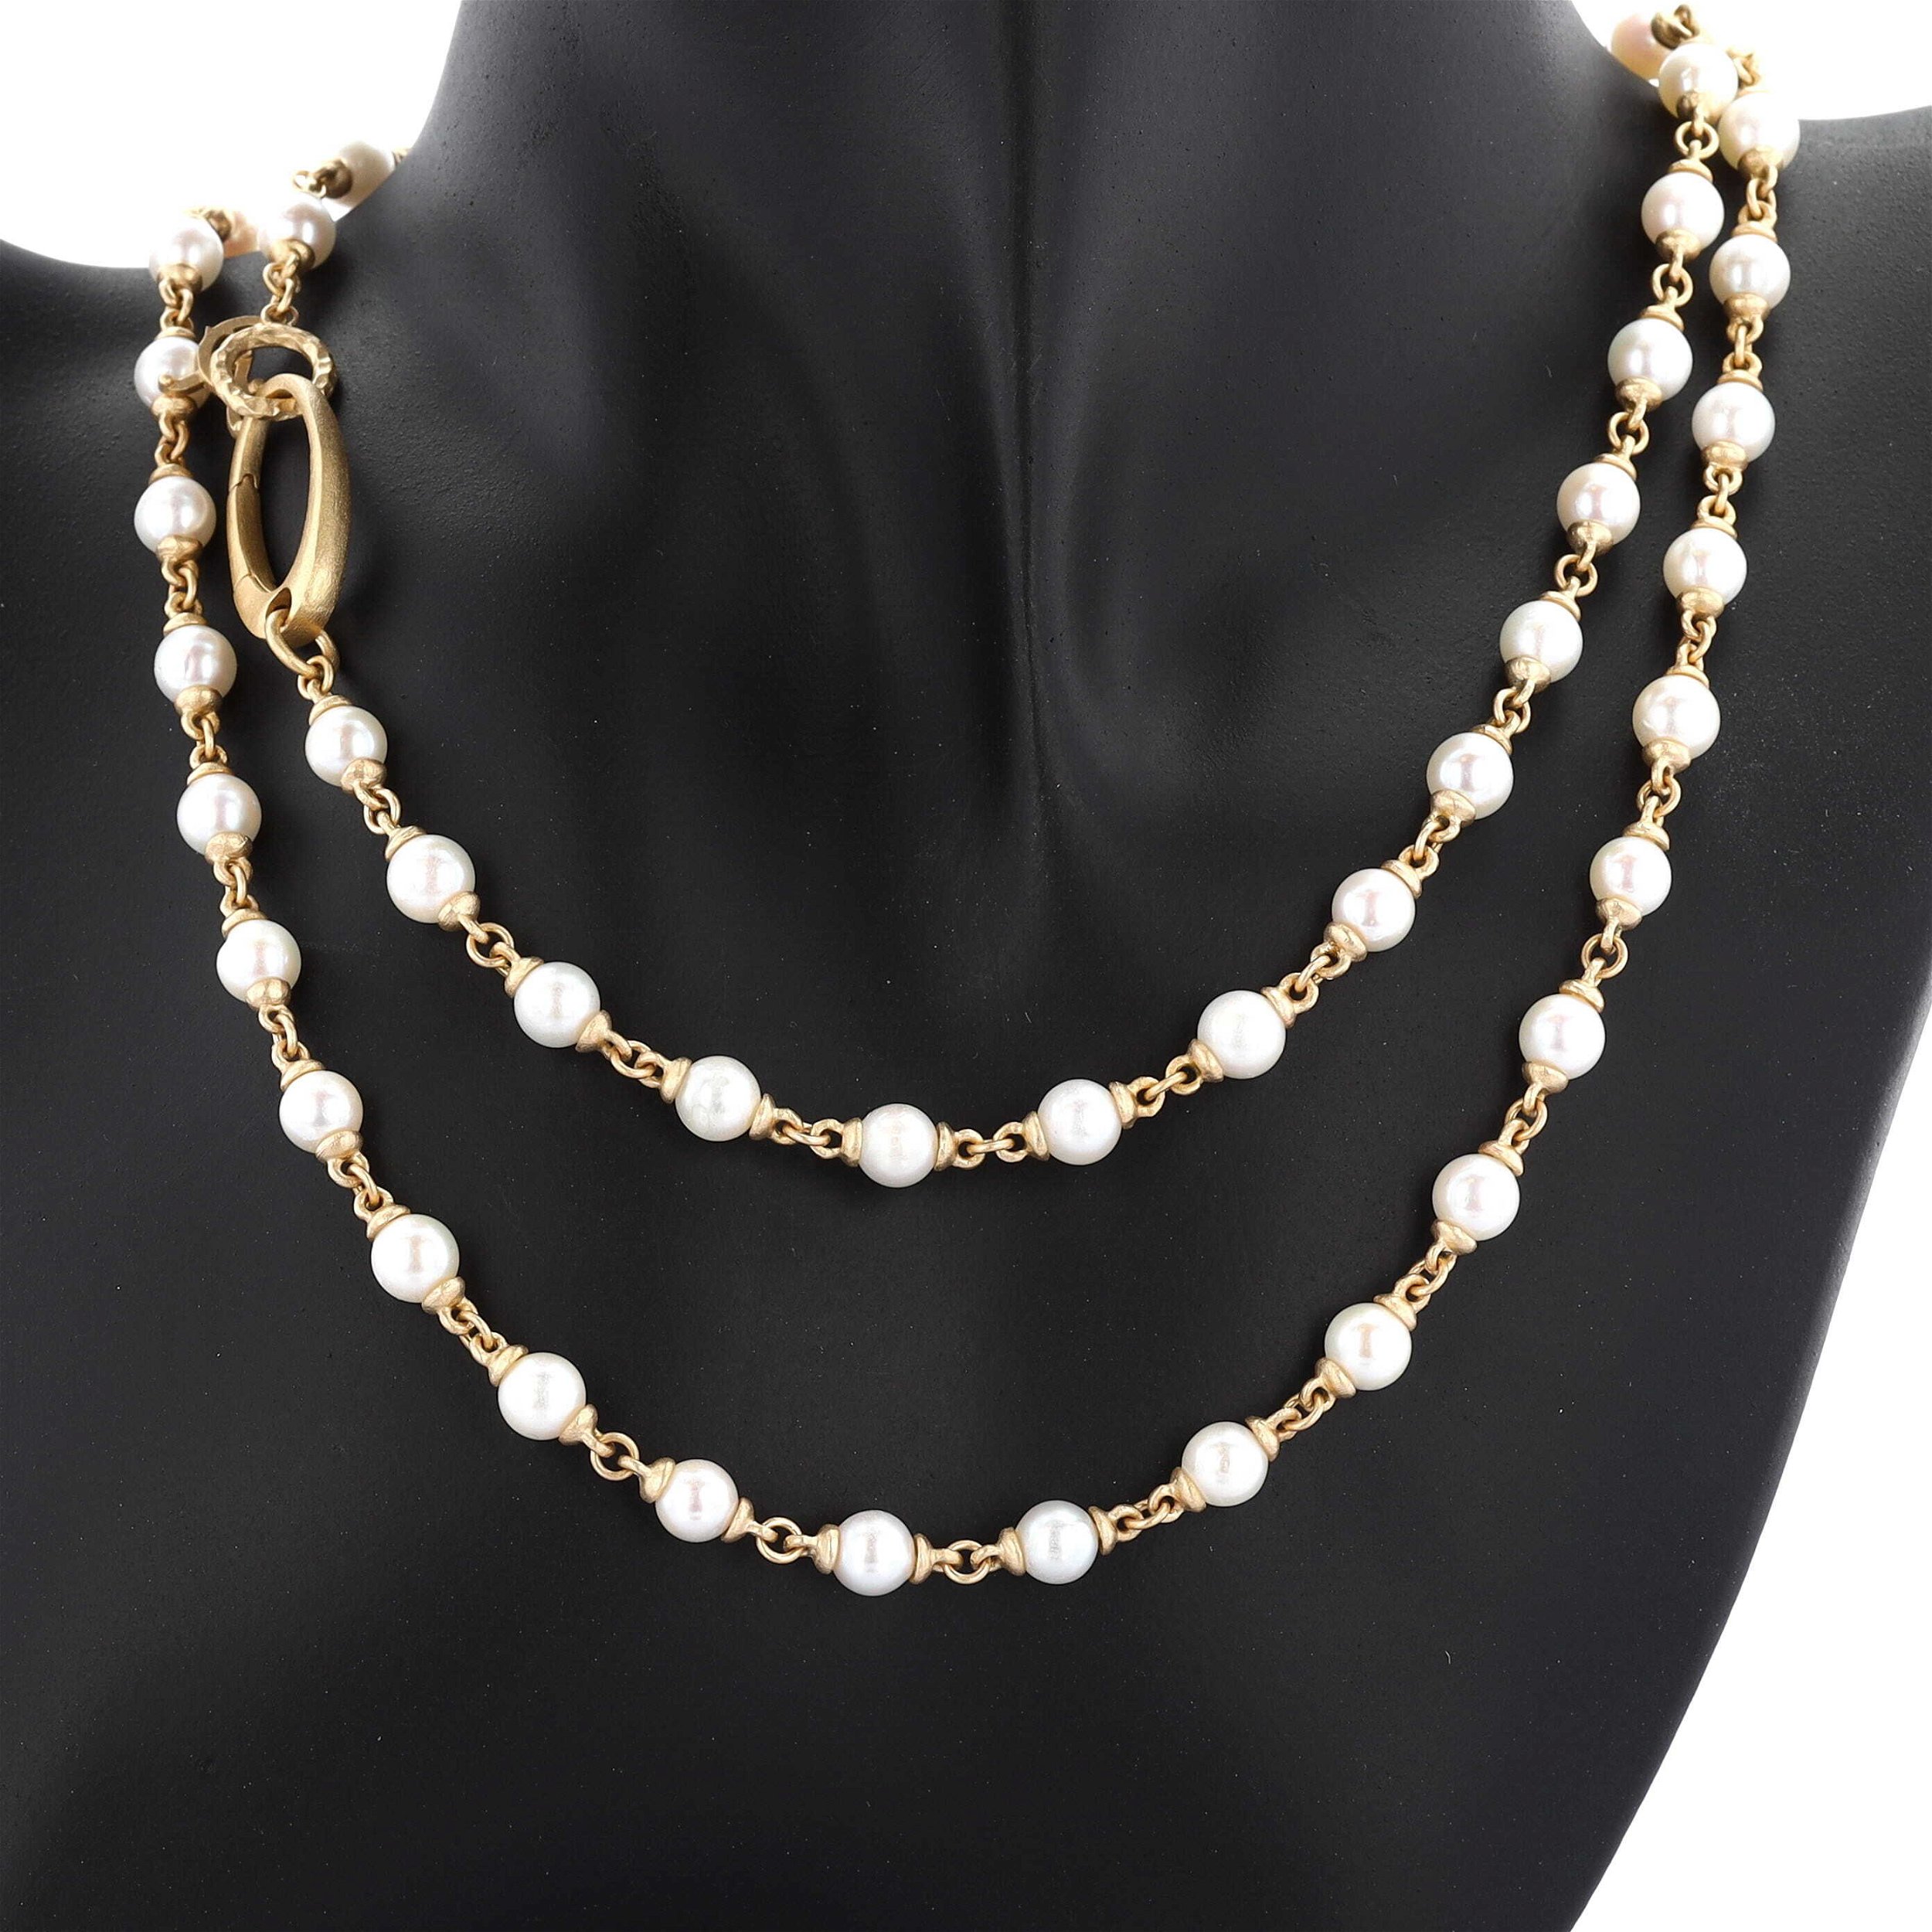 32" 14K Yellow Gold Akoya Pearl Necklace with Gold Clasp